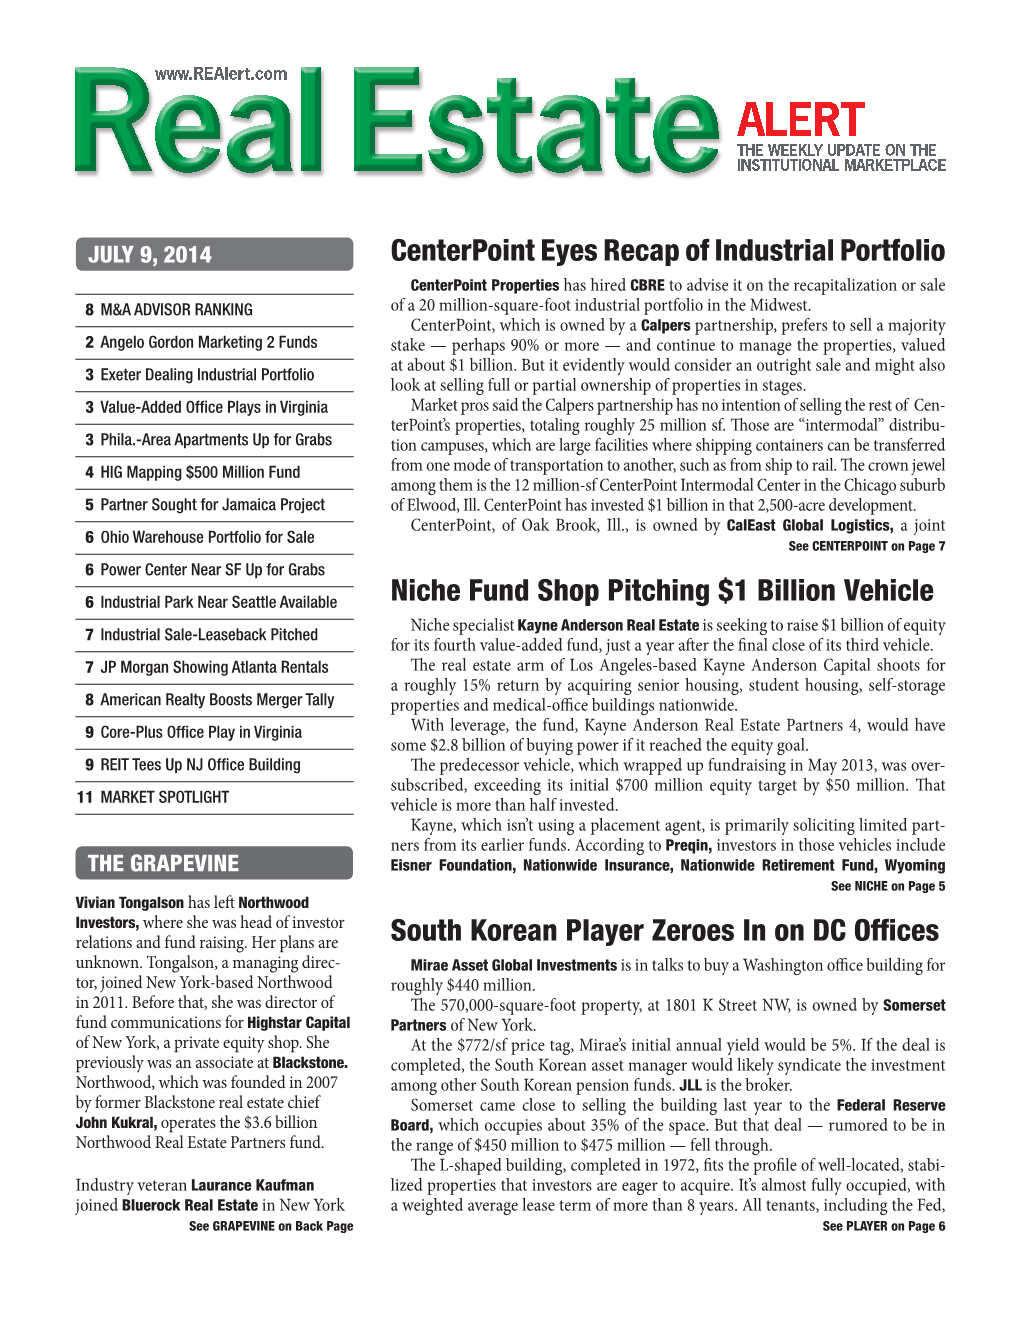 Real Estate Alert’S Logo — an Ideal the 14-Story Building, Completed in 1986, Has a Marble Addition to Your Marketing Materials